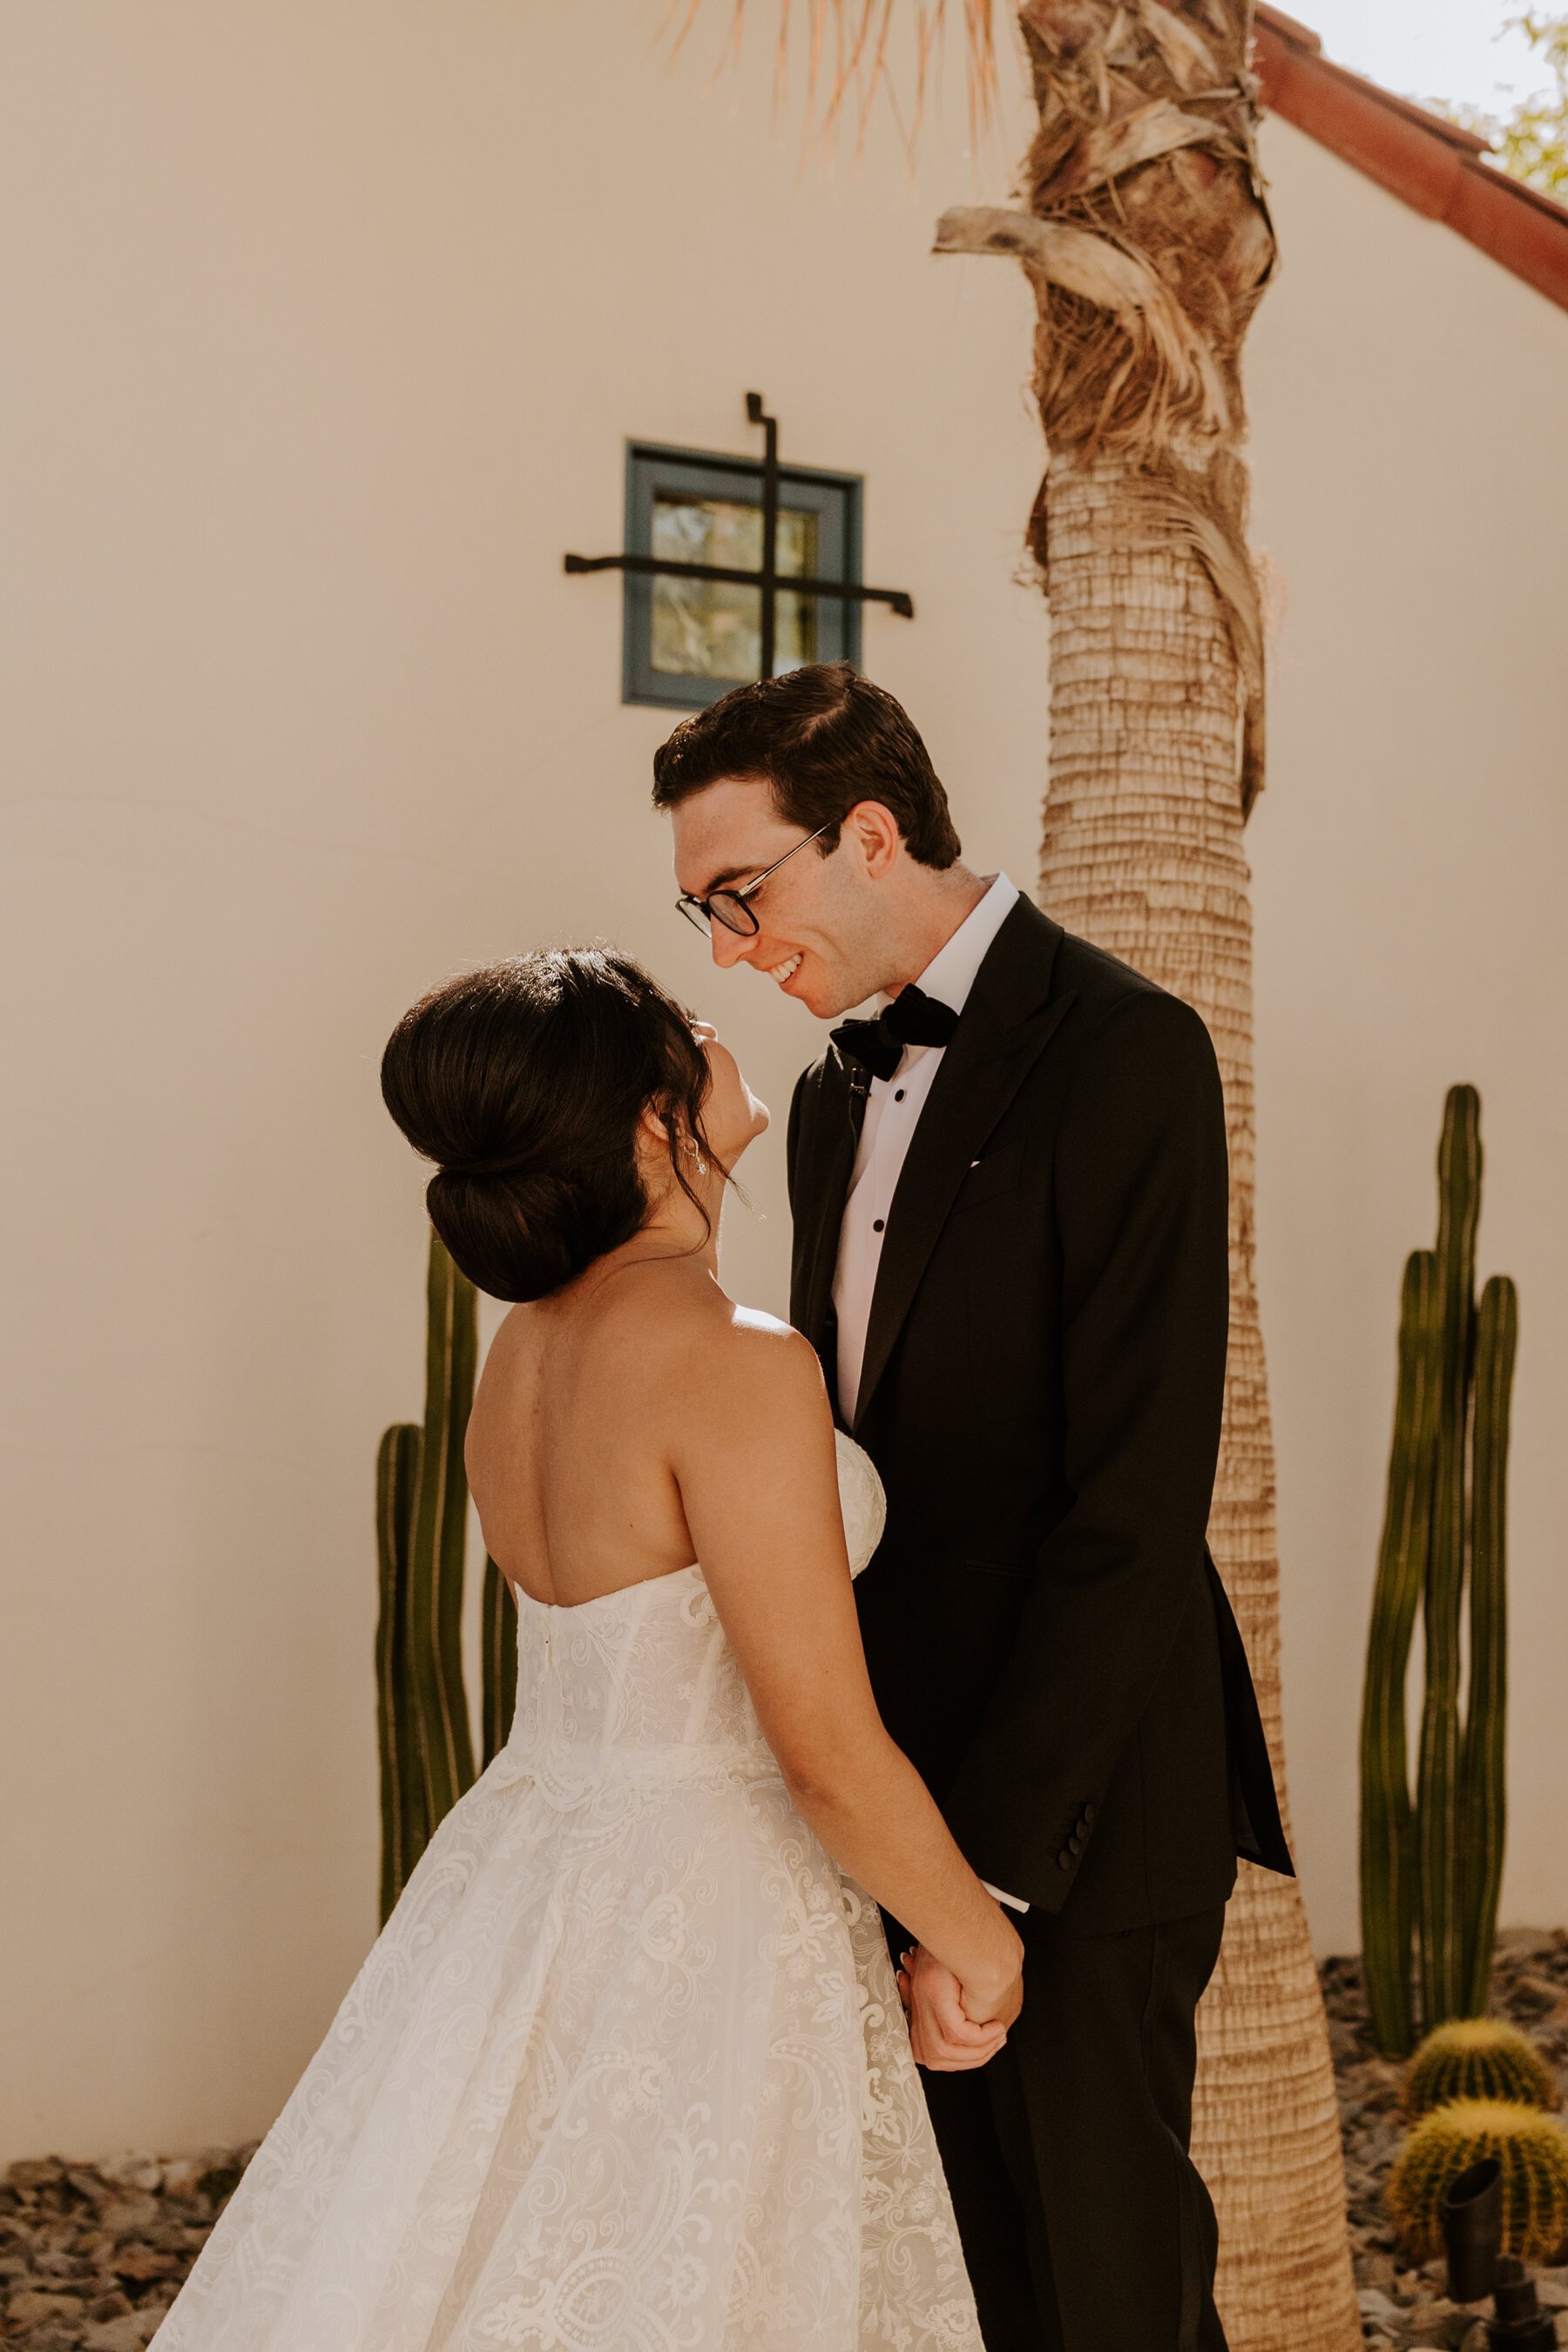 Bride and Groom First Look at La Serena Villas Palm Springs, Palm Springs Wedding Photographer, Photo by Tida Svy